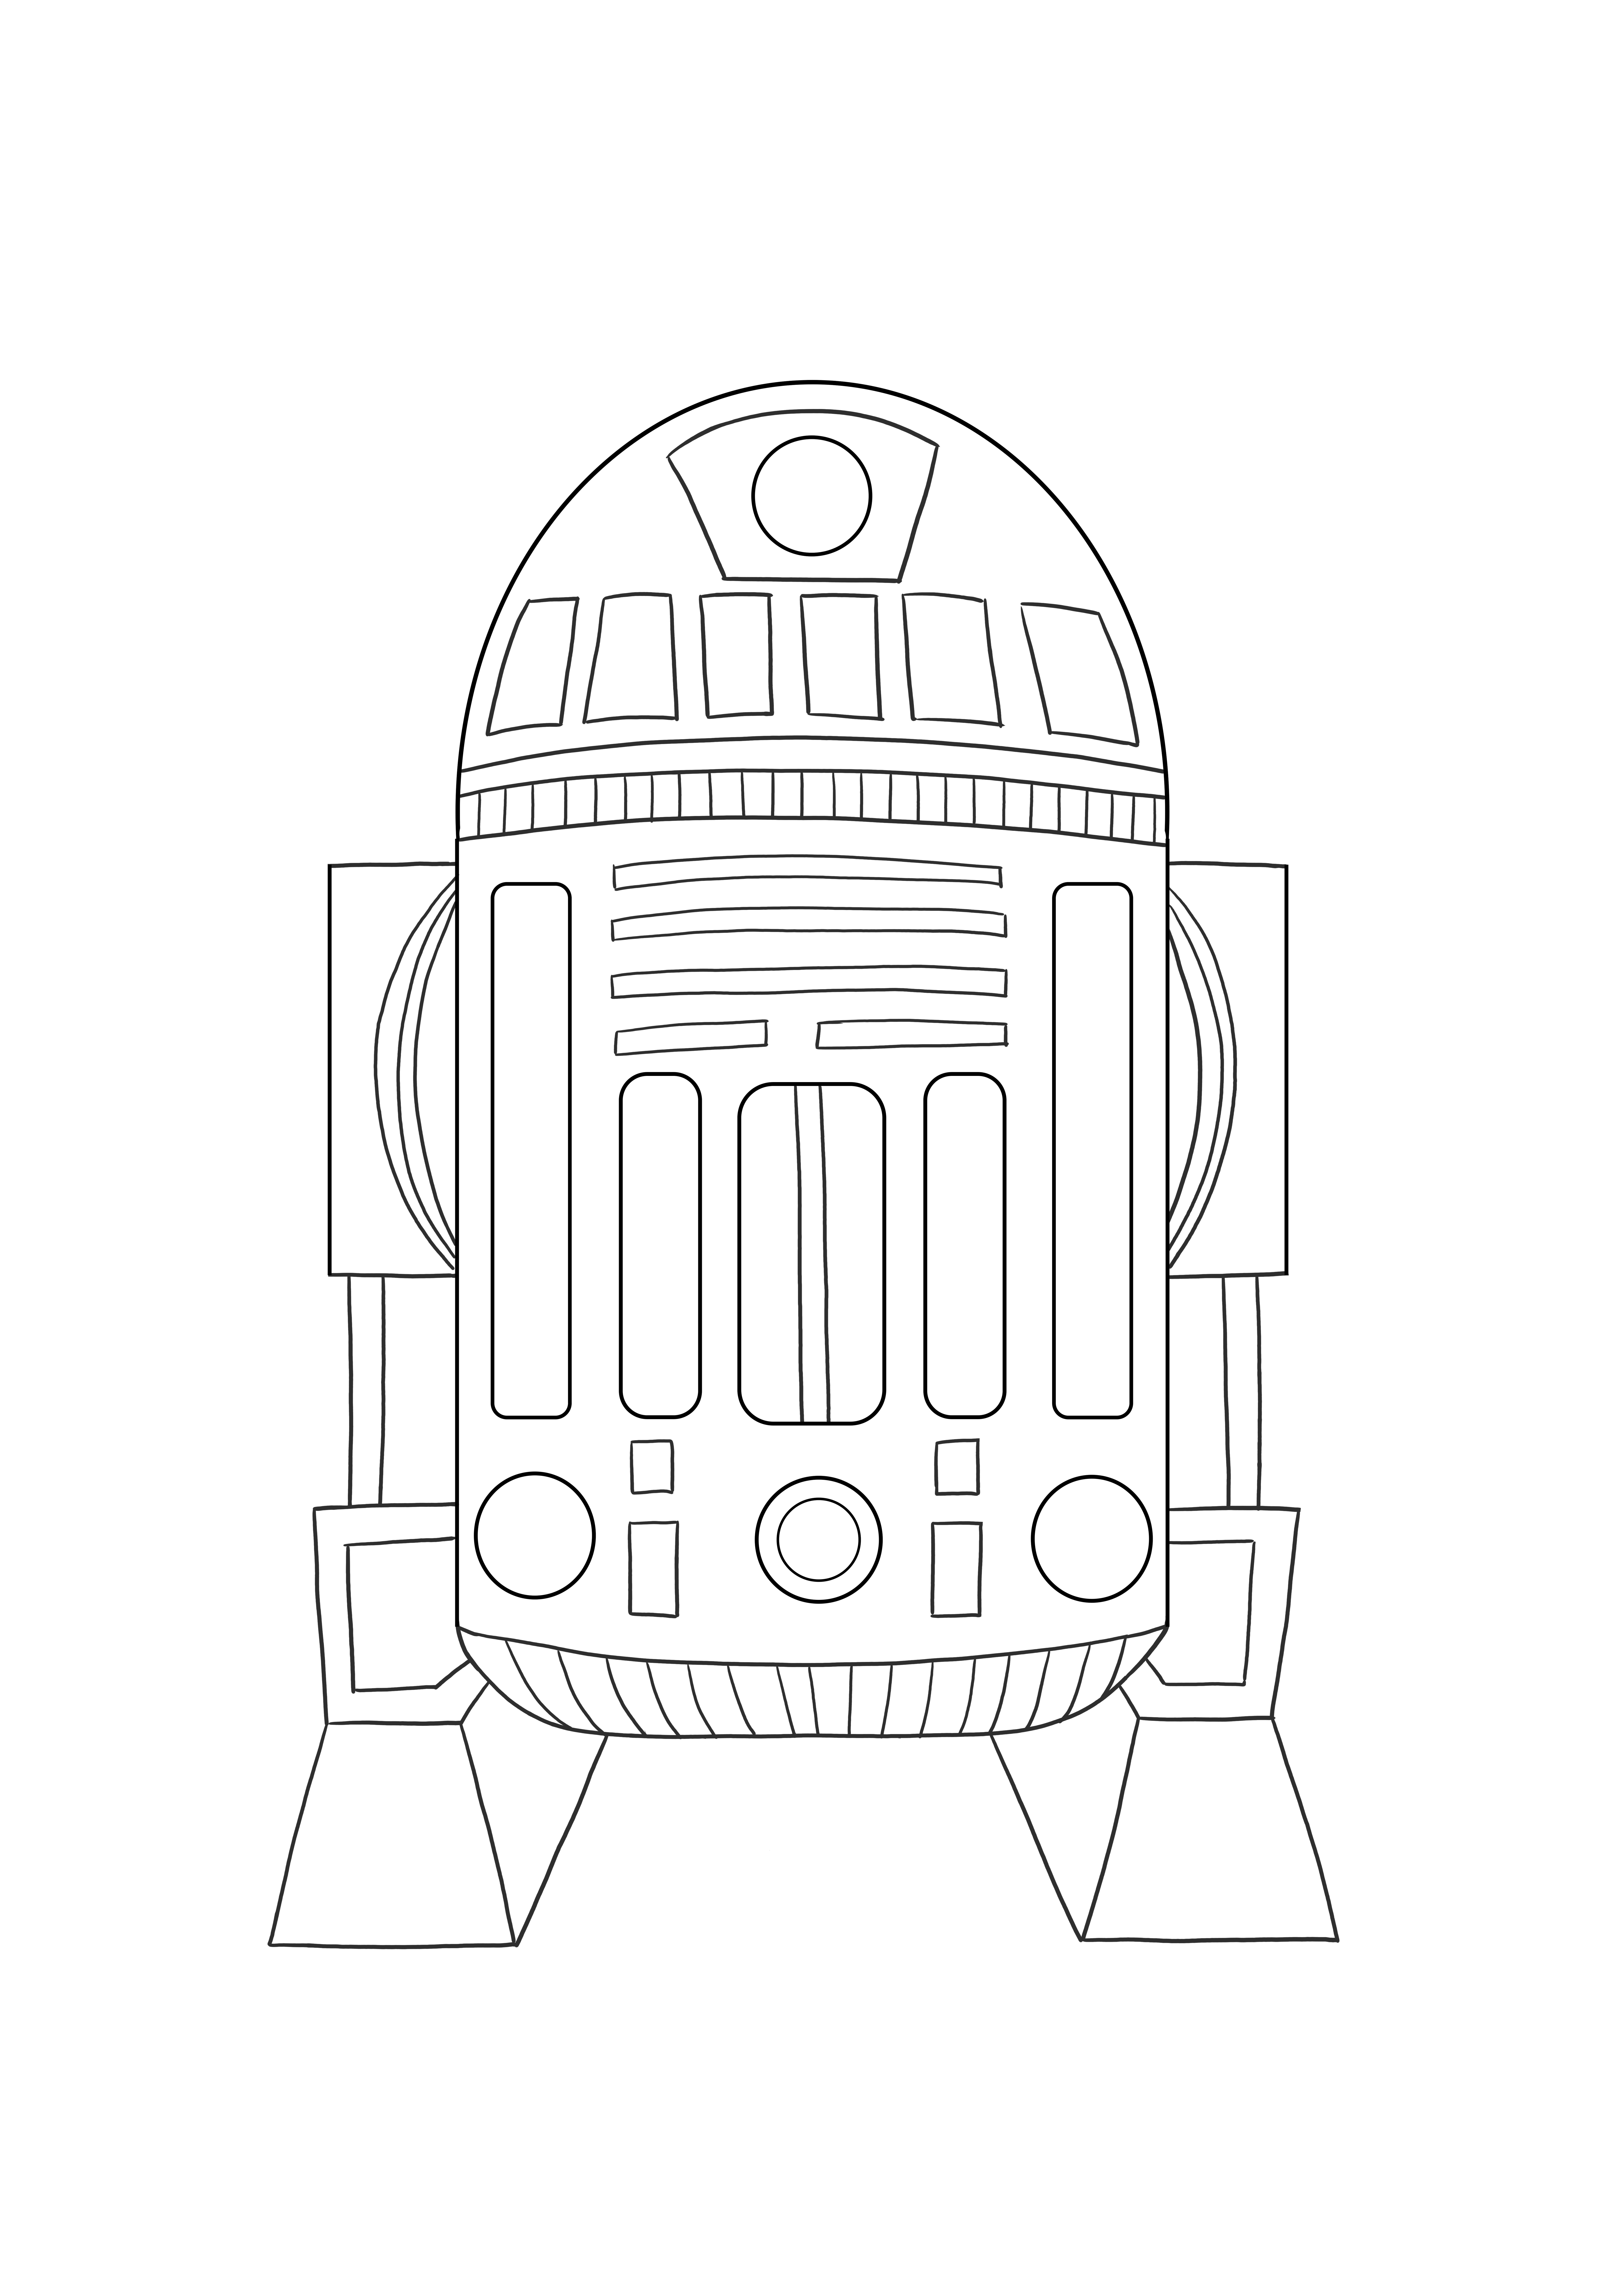 Astromed droid R2 free printable image to color for kids